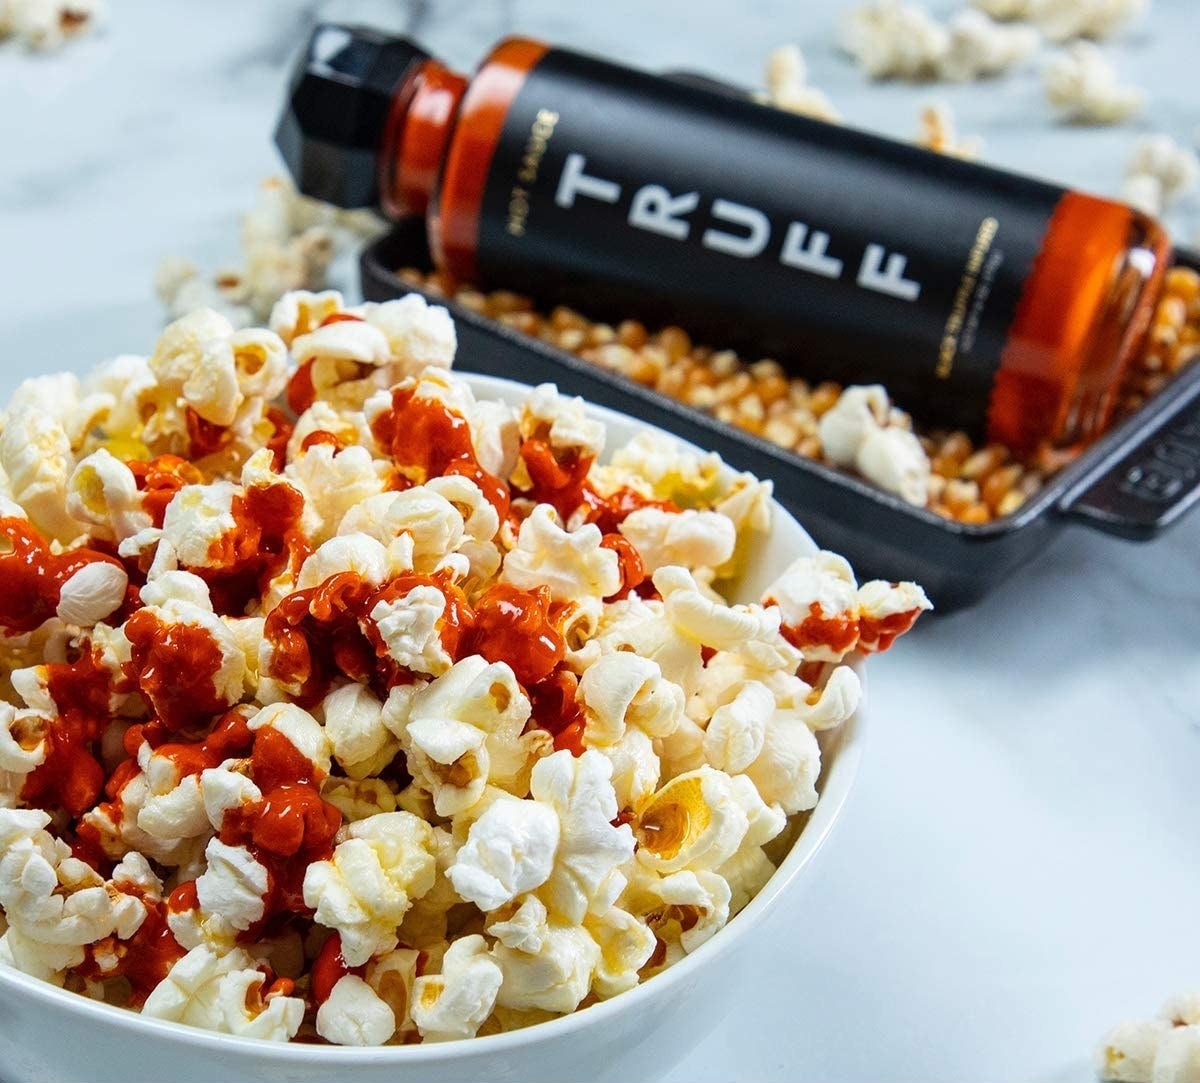 Some of the sauce drizzled over a bowl of popcorn with the bottle in the background